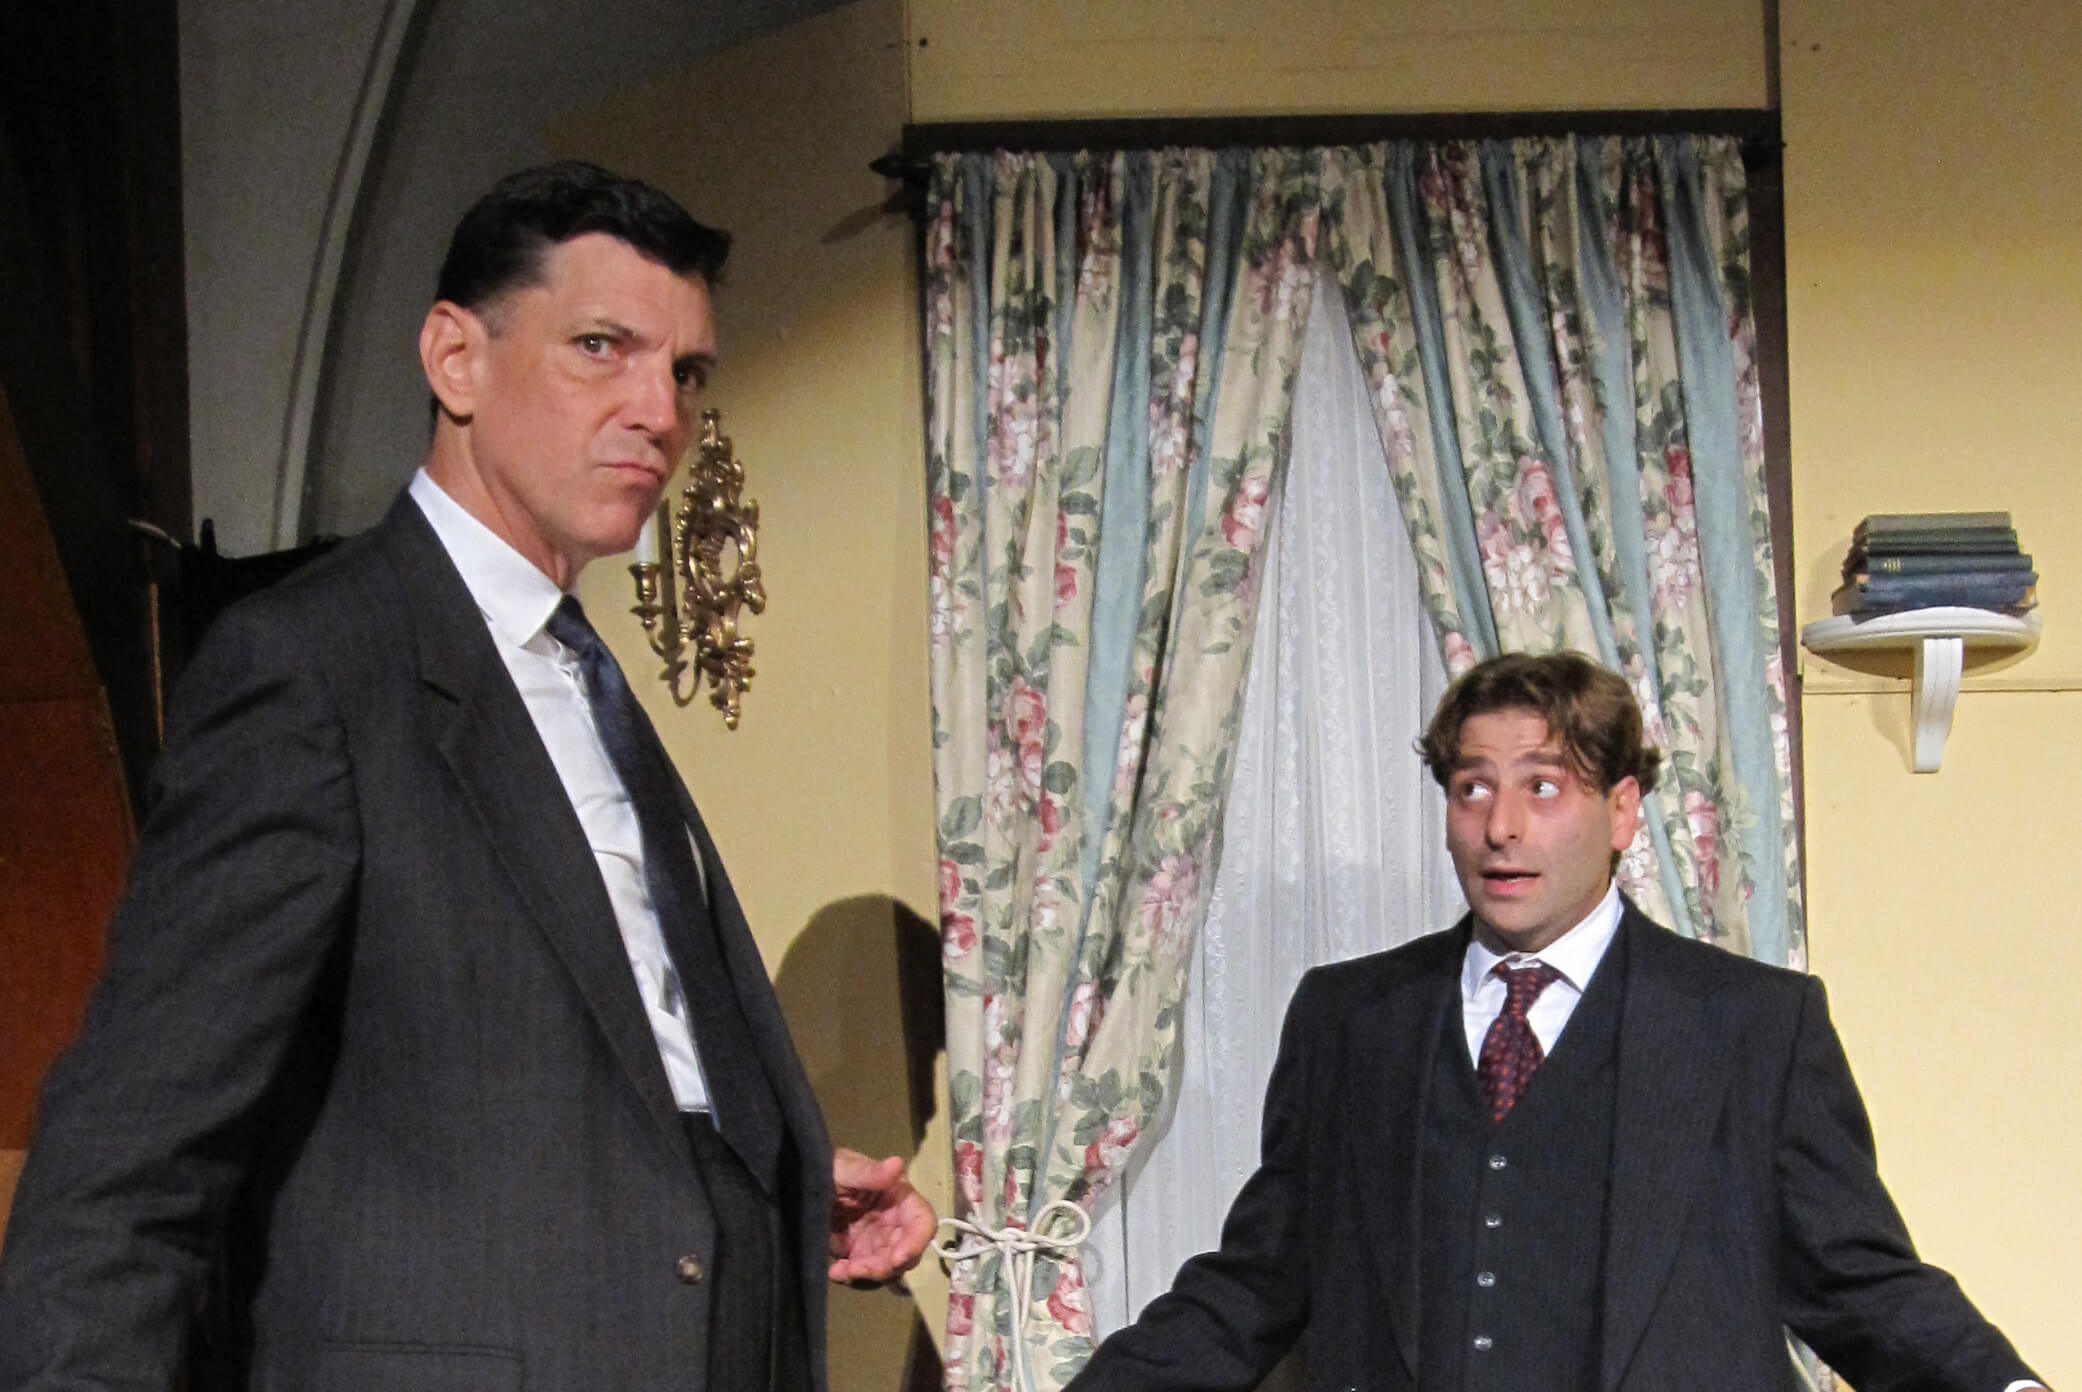 Paul Battiato and Morgan J. Nichols in Lynne Theater Company's "Arsenic and Old Lace